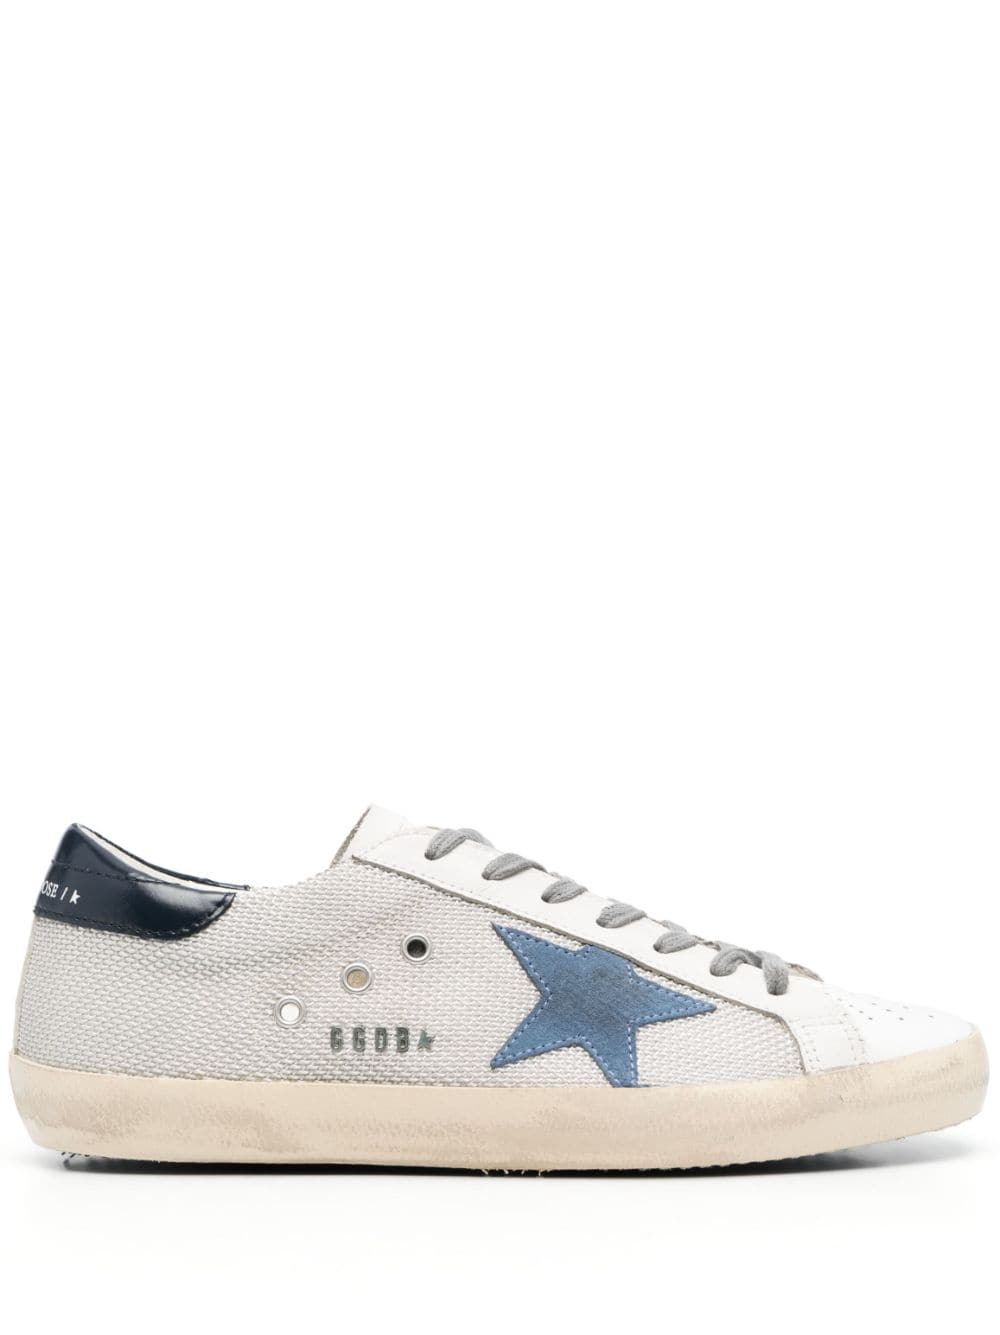 Golden Goose Super-star Nappa Upper Shiny Leather Star And Heel In Beige/night Blue